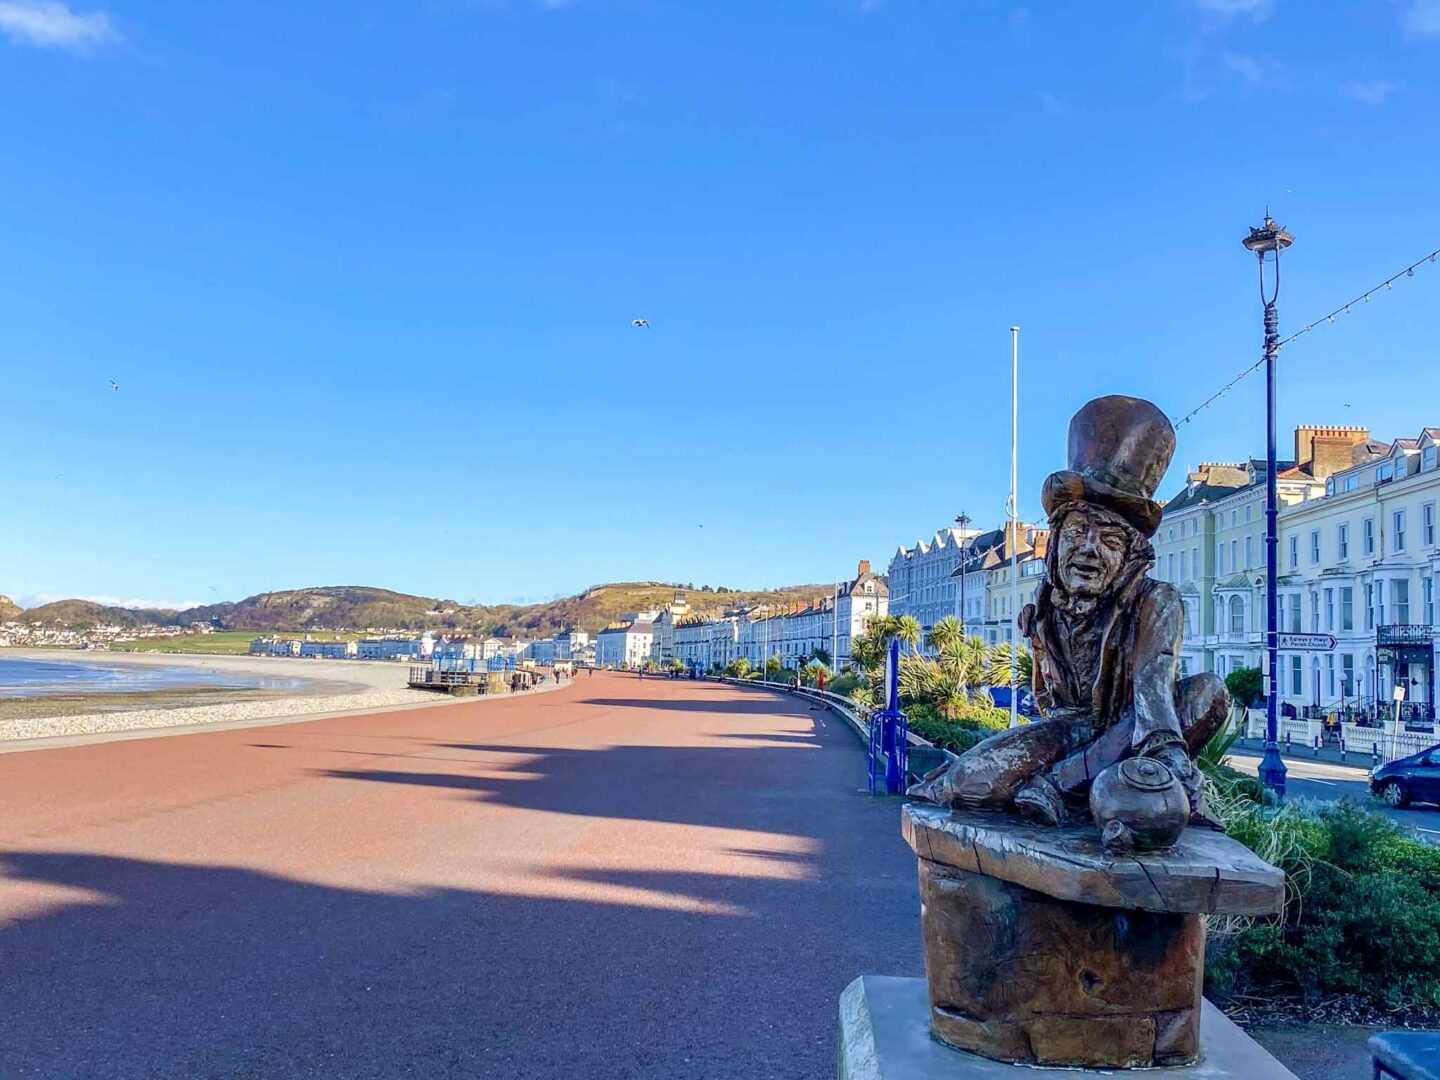 places to visit in North Wales, Llandudno Boardwalk on sunny day